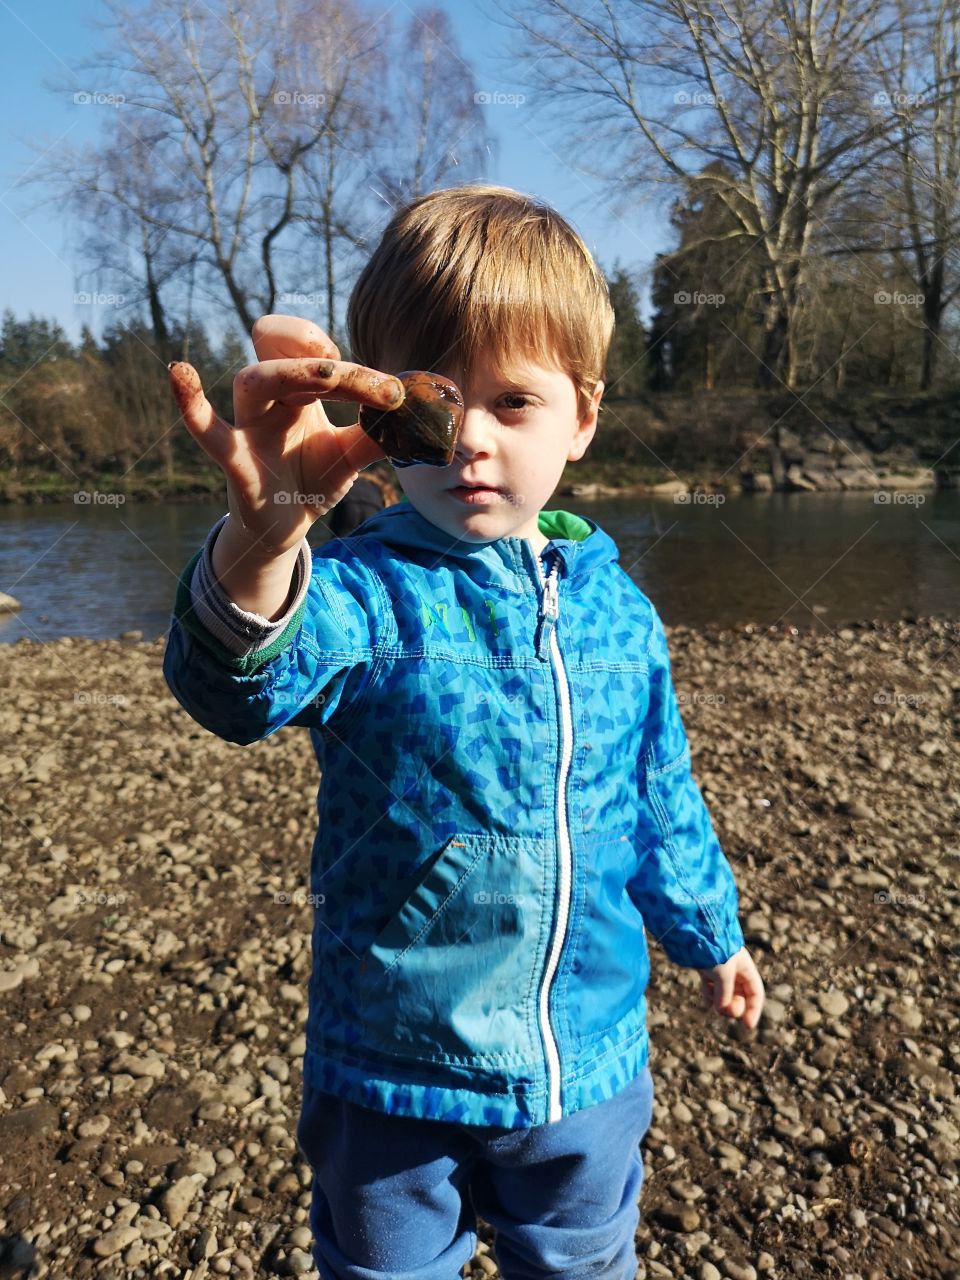 young boy proudly holds up a rock he found by the river